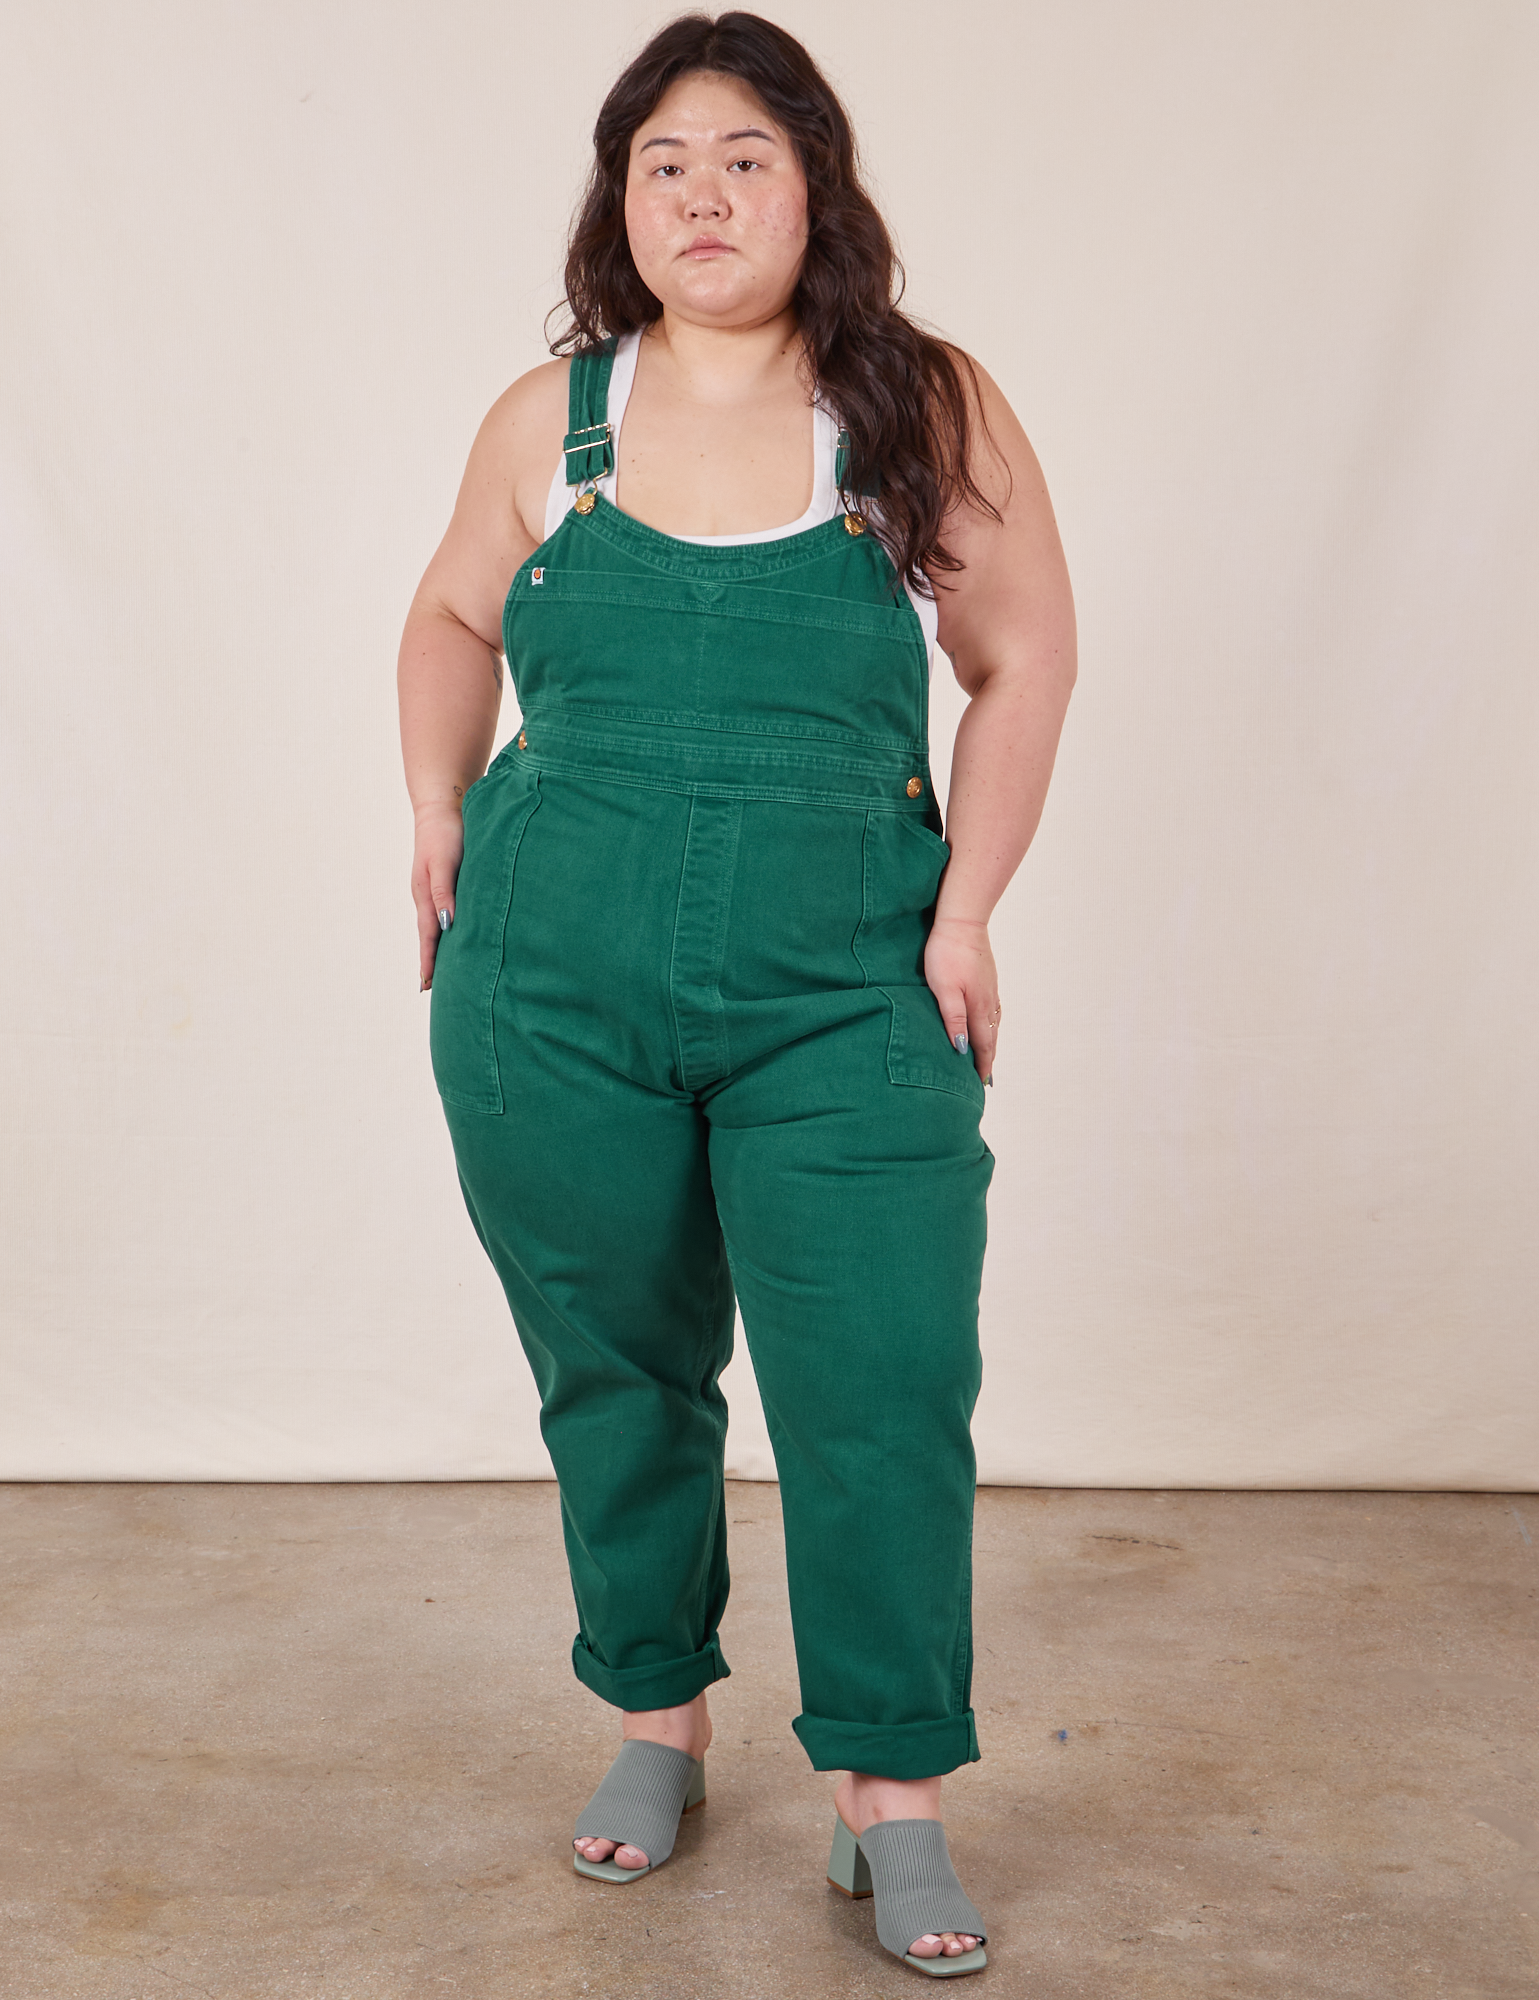 Ashley is 5'7" and wearing 1XL Original Overalls in Mono Hunter Green